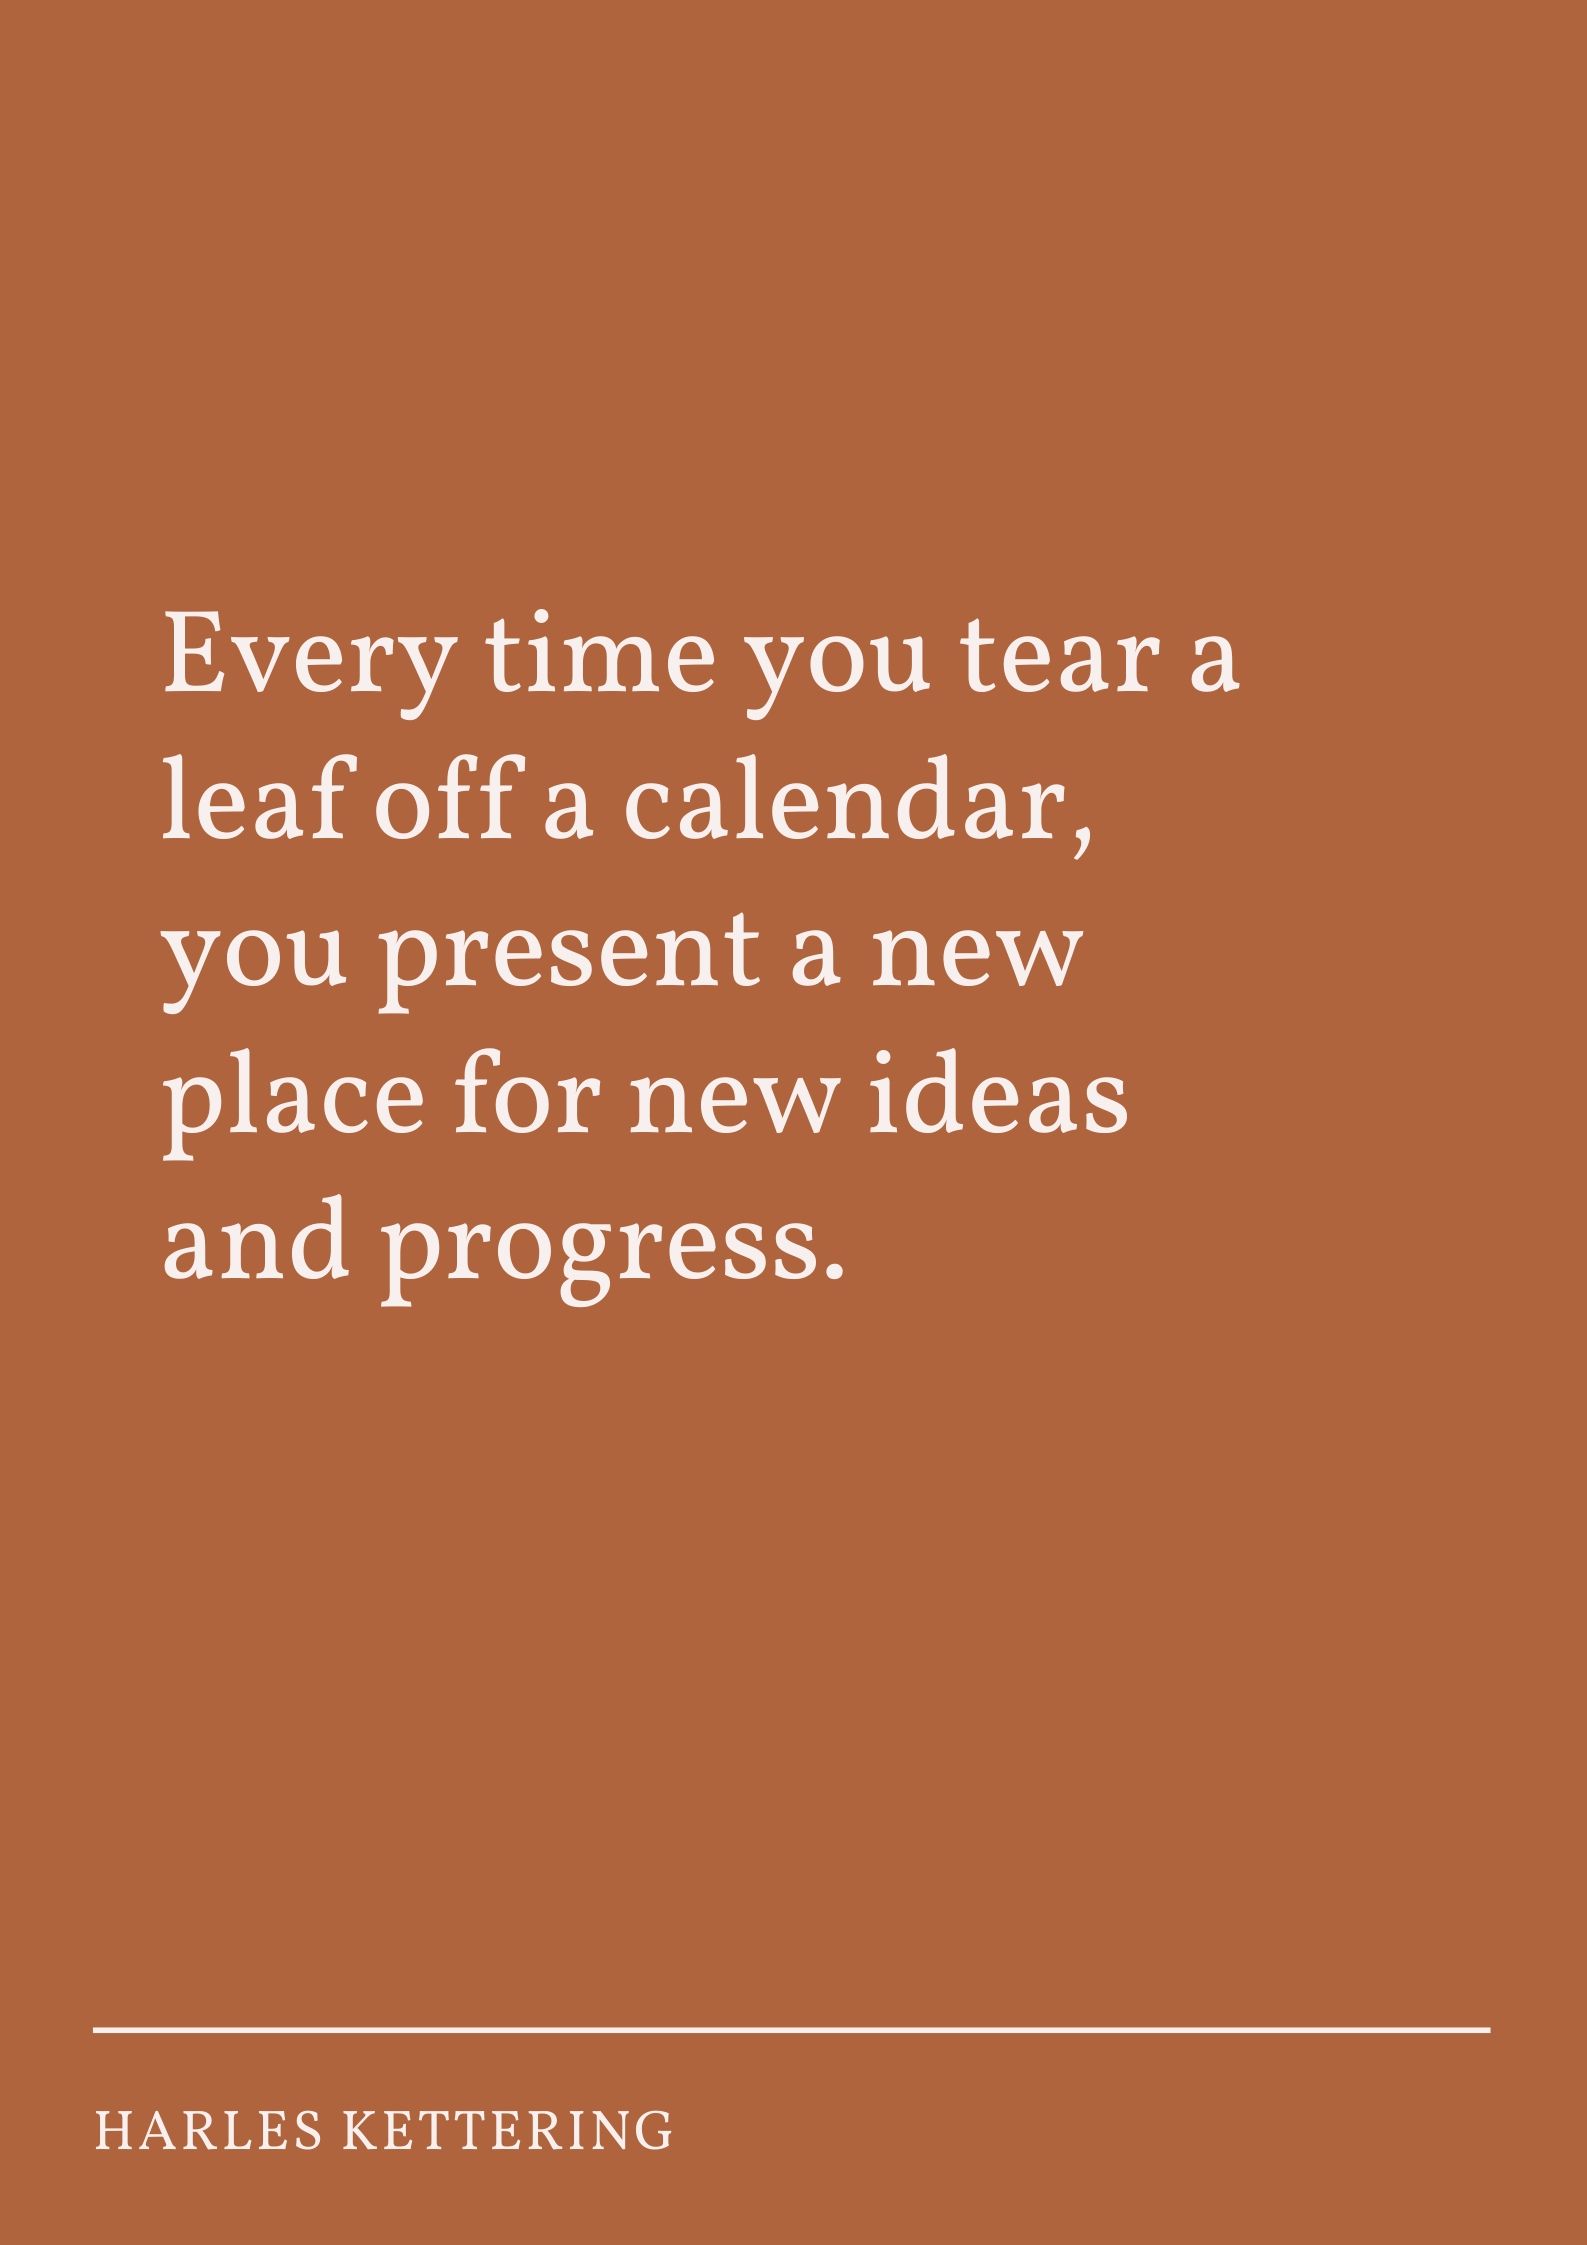 Every time you tear a leaf off a calendar, you present a new place for new ideas and progress.